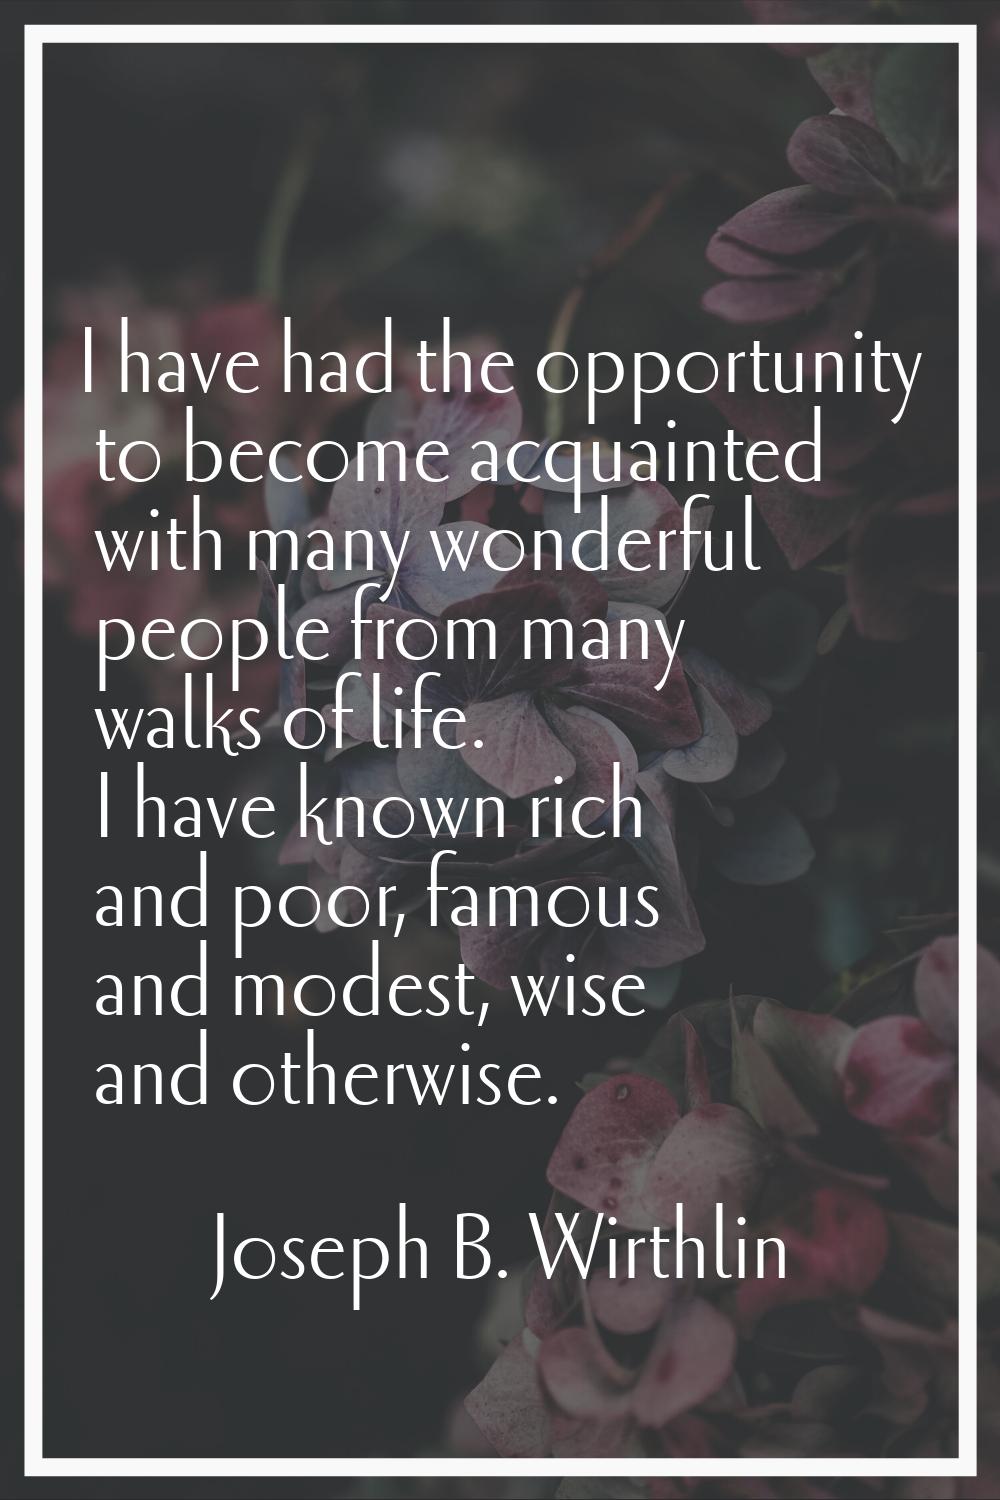 I have had the opportunity to become acquainted with many wonderful people from many walks of life.